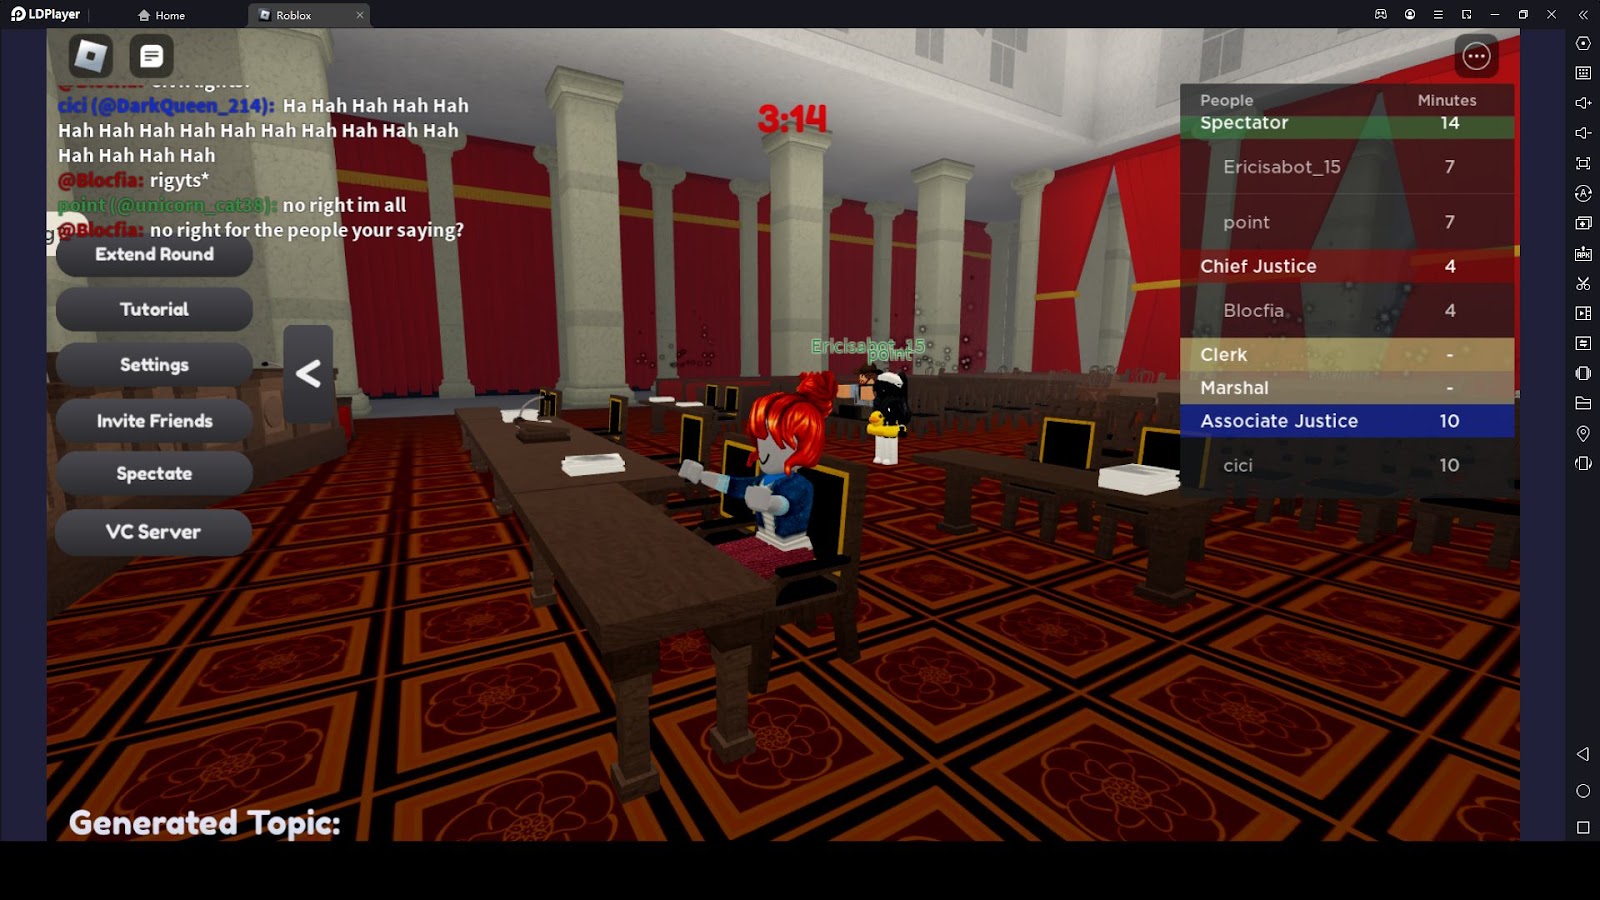 Play Roblox Supreme Court with LDPlayer 9